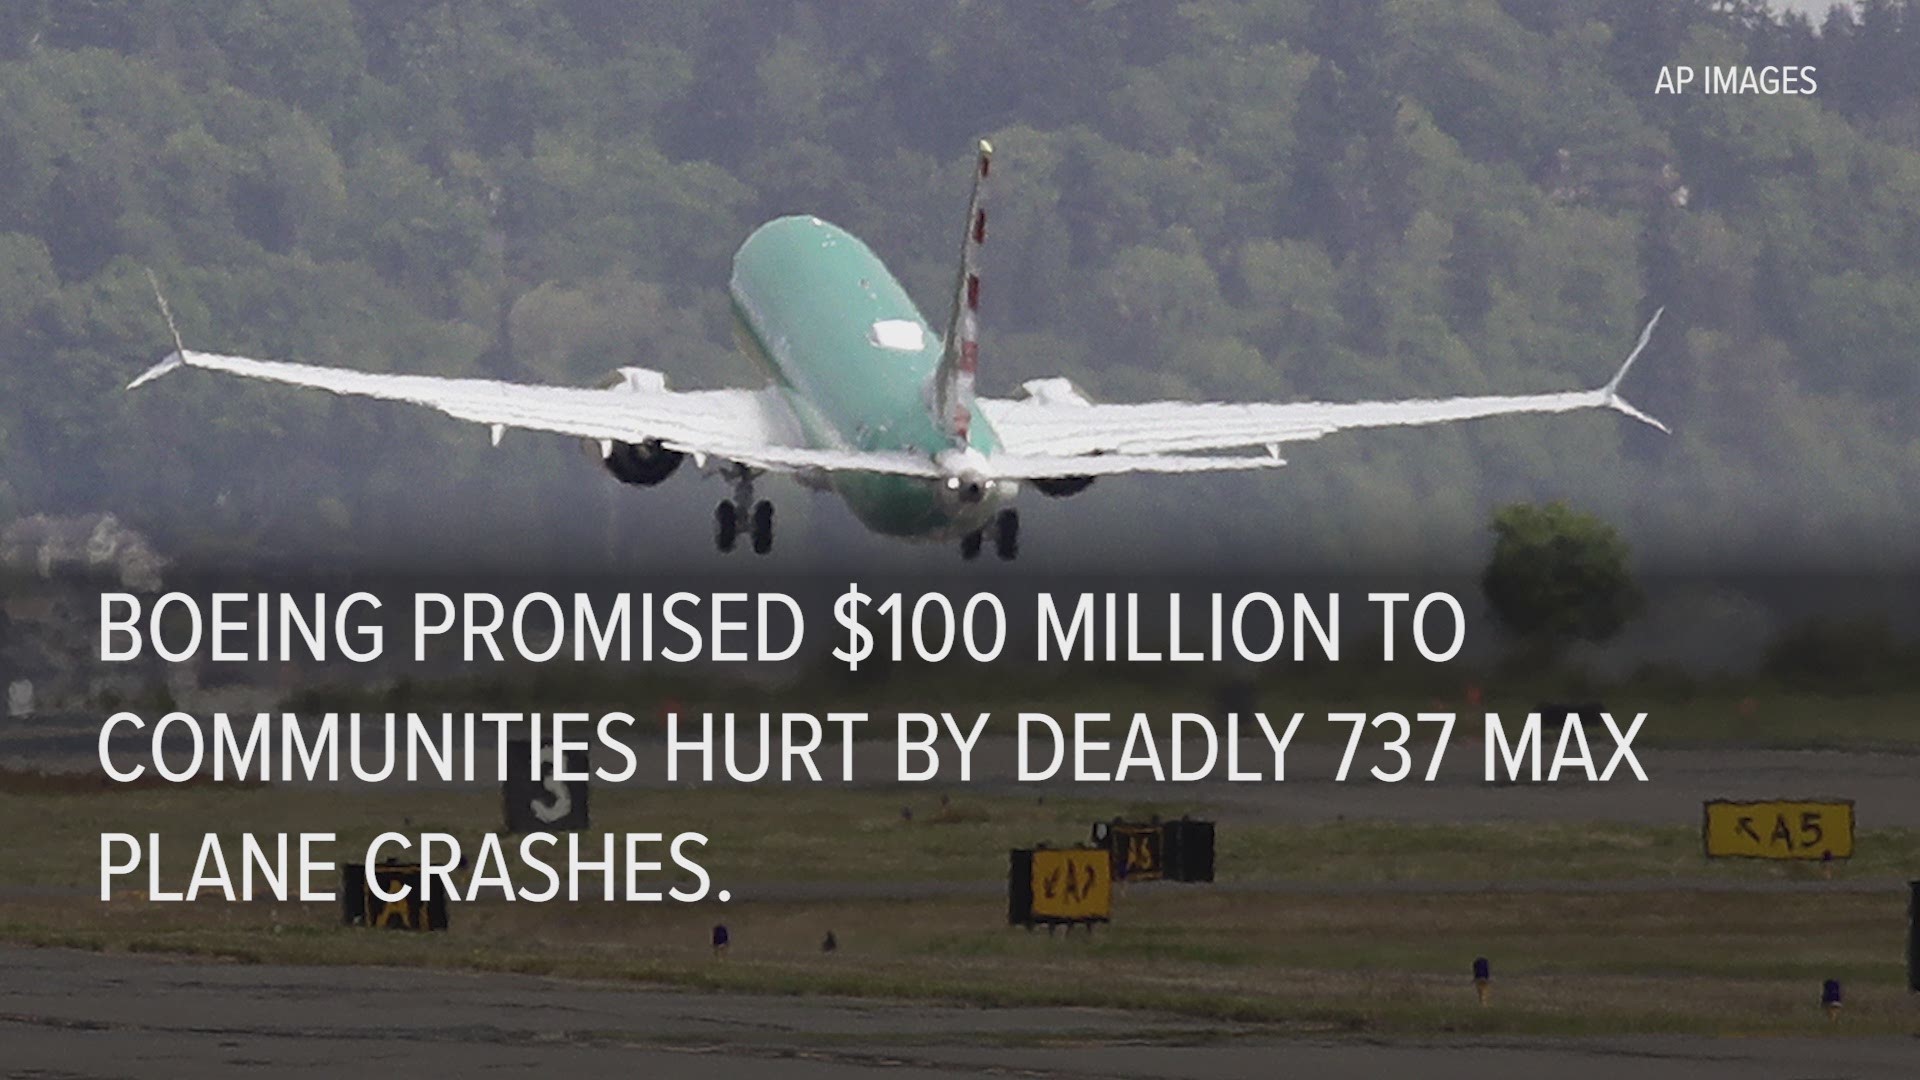 Boeing is going to give millions to communities affected by the deadly 737 Max plane crashes.